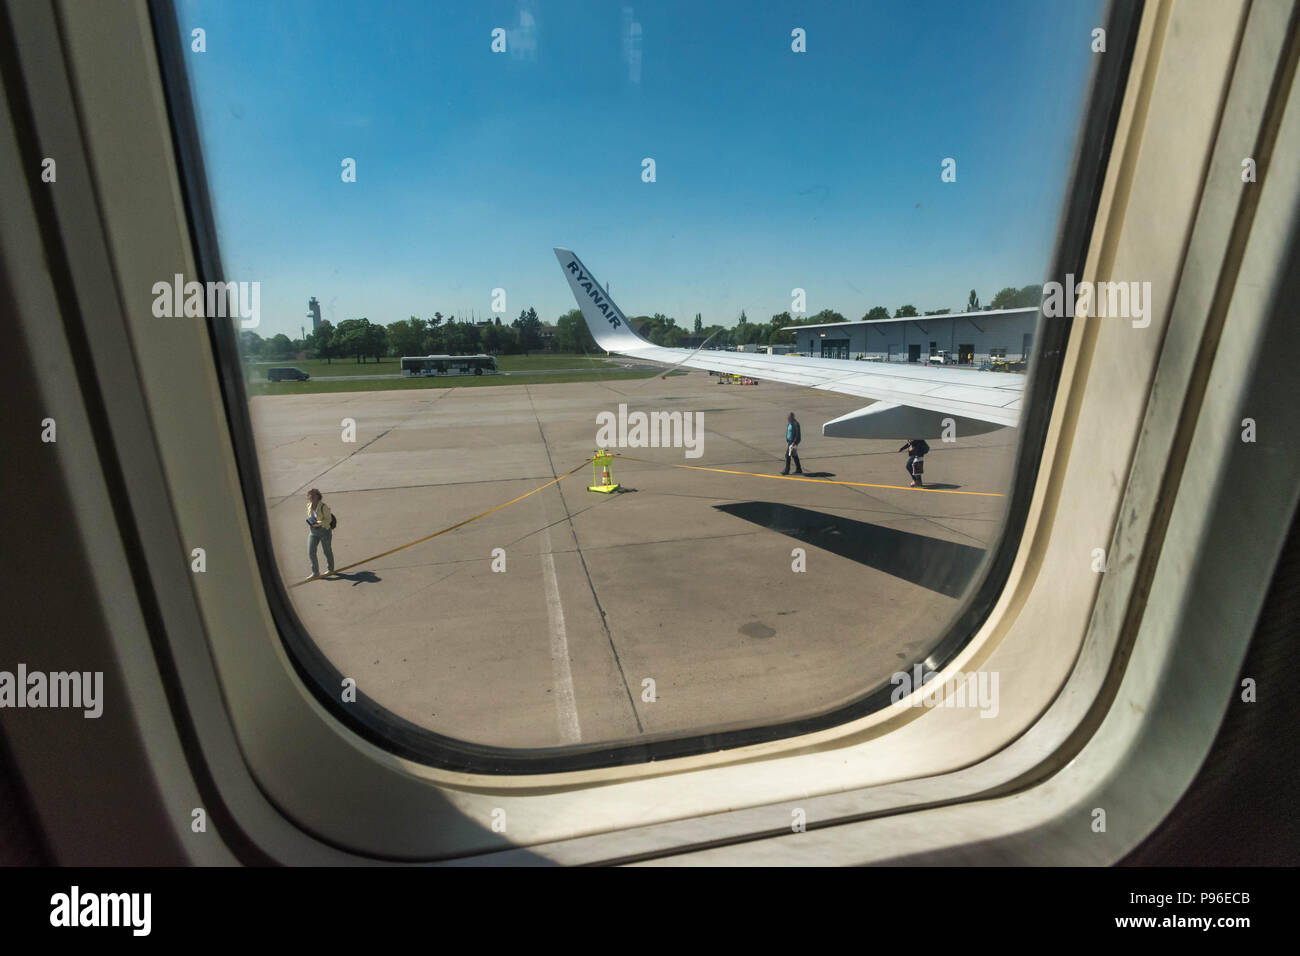 Looking through the window of a Ryan Air airplane Stock Photo